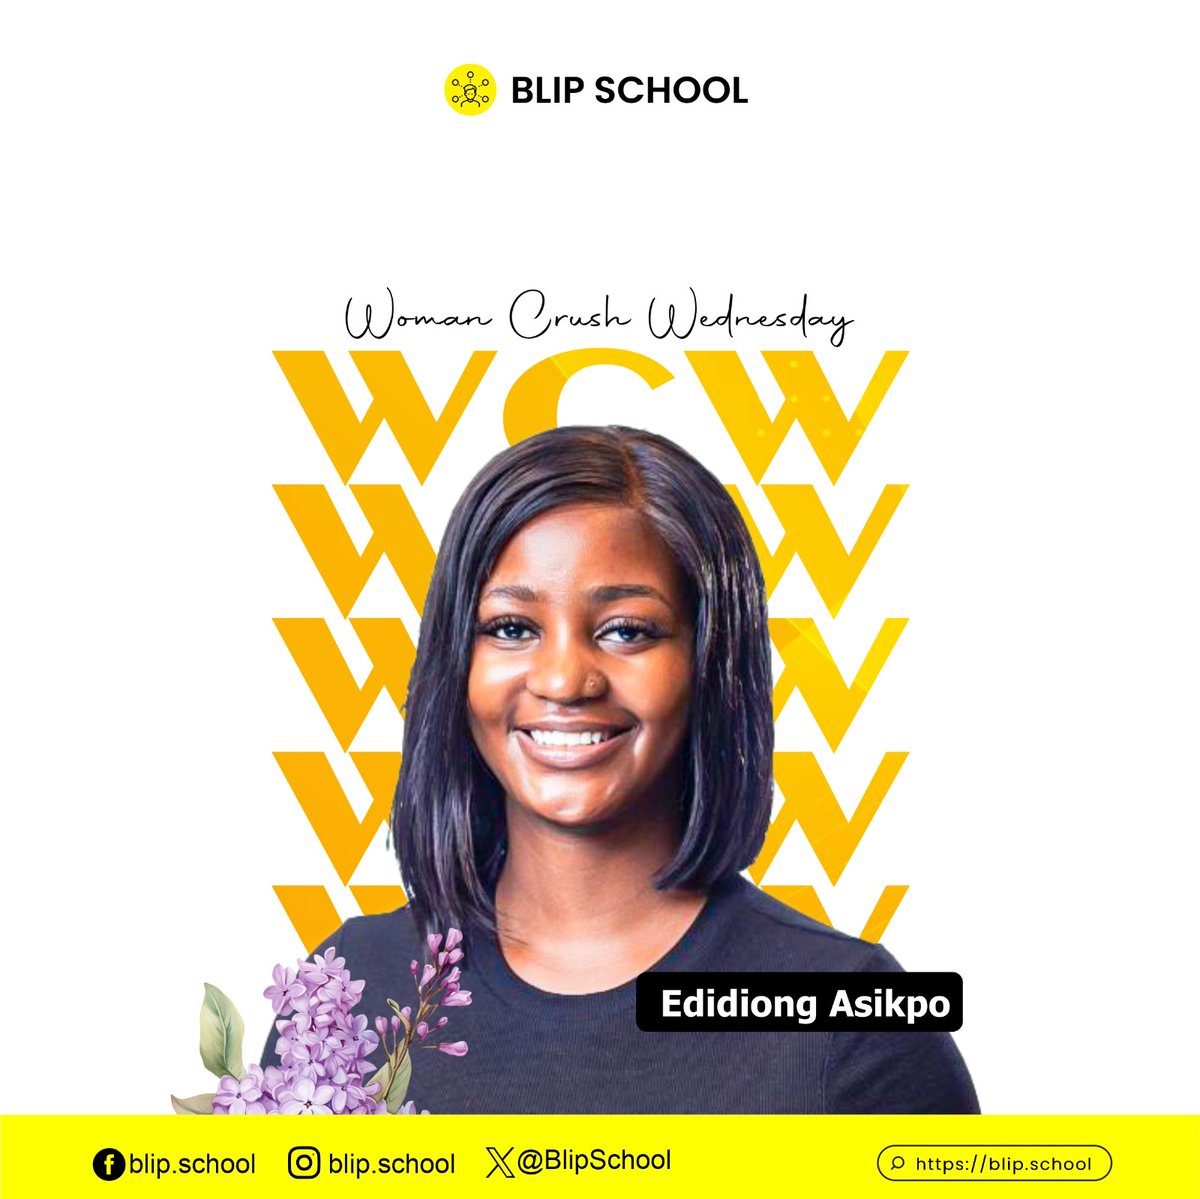 🥰 Hello everyone! It's another lovely Wednesday, and we're excited to introduce our new #WomanCrushWednesday (WCW) feature!

👩‍💻  Check out the comment section for more details and find out who our inspiring WCW is this week!

#blipschool
#DelfinSC 
#WCW